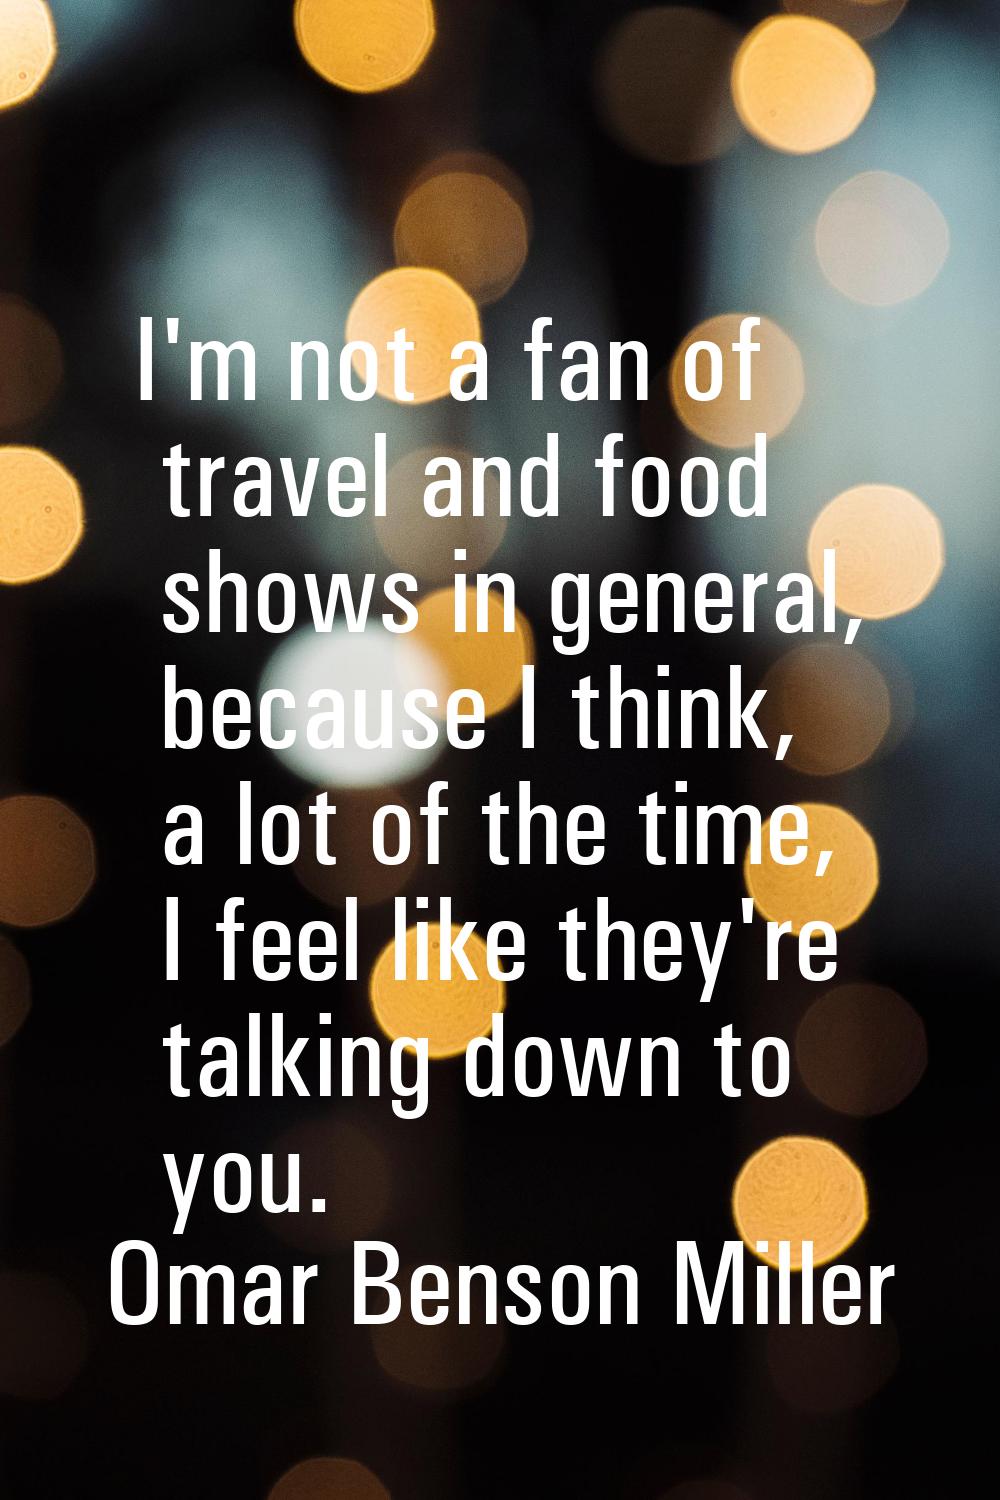 I'm not a fan of travel and food shows in general, because I think, a lot of the time, I feel like 